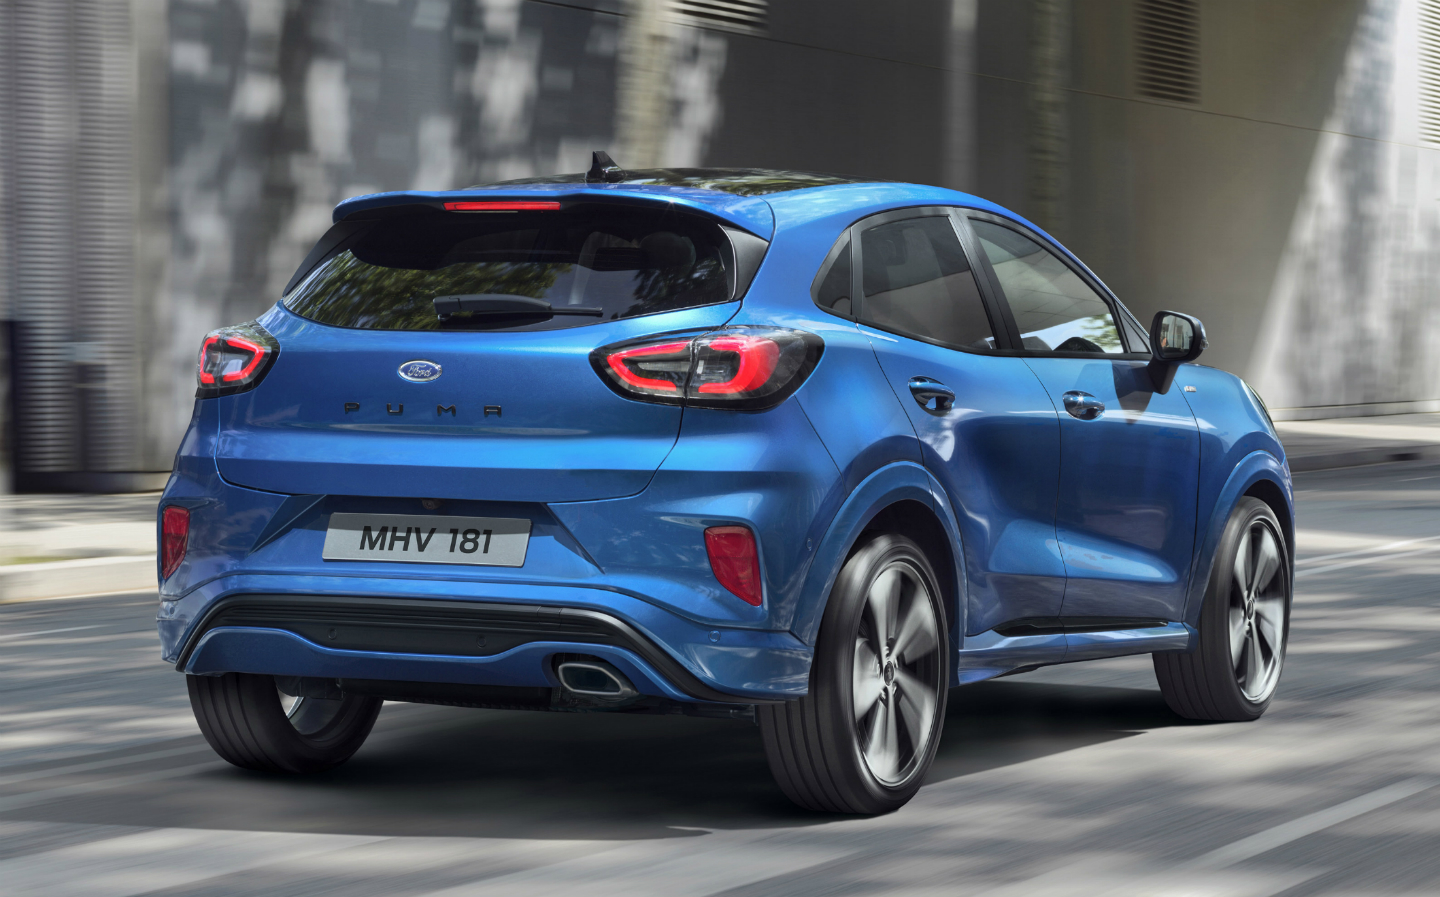 2020 Ford Puma: prices, engines, practicality, specs and release date